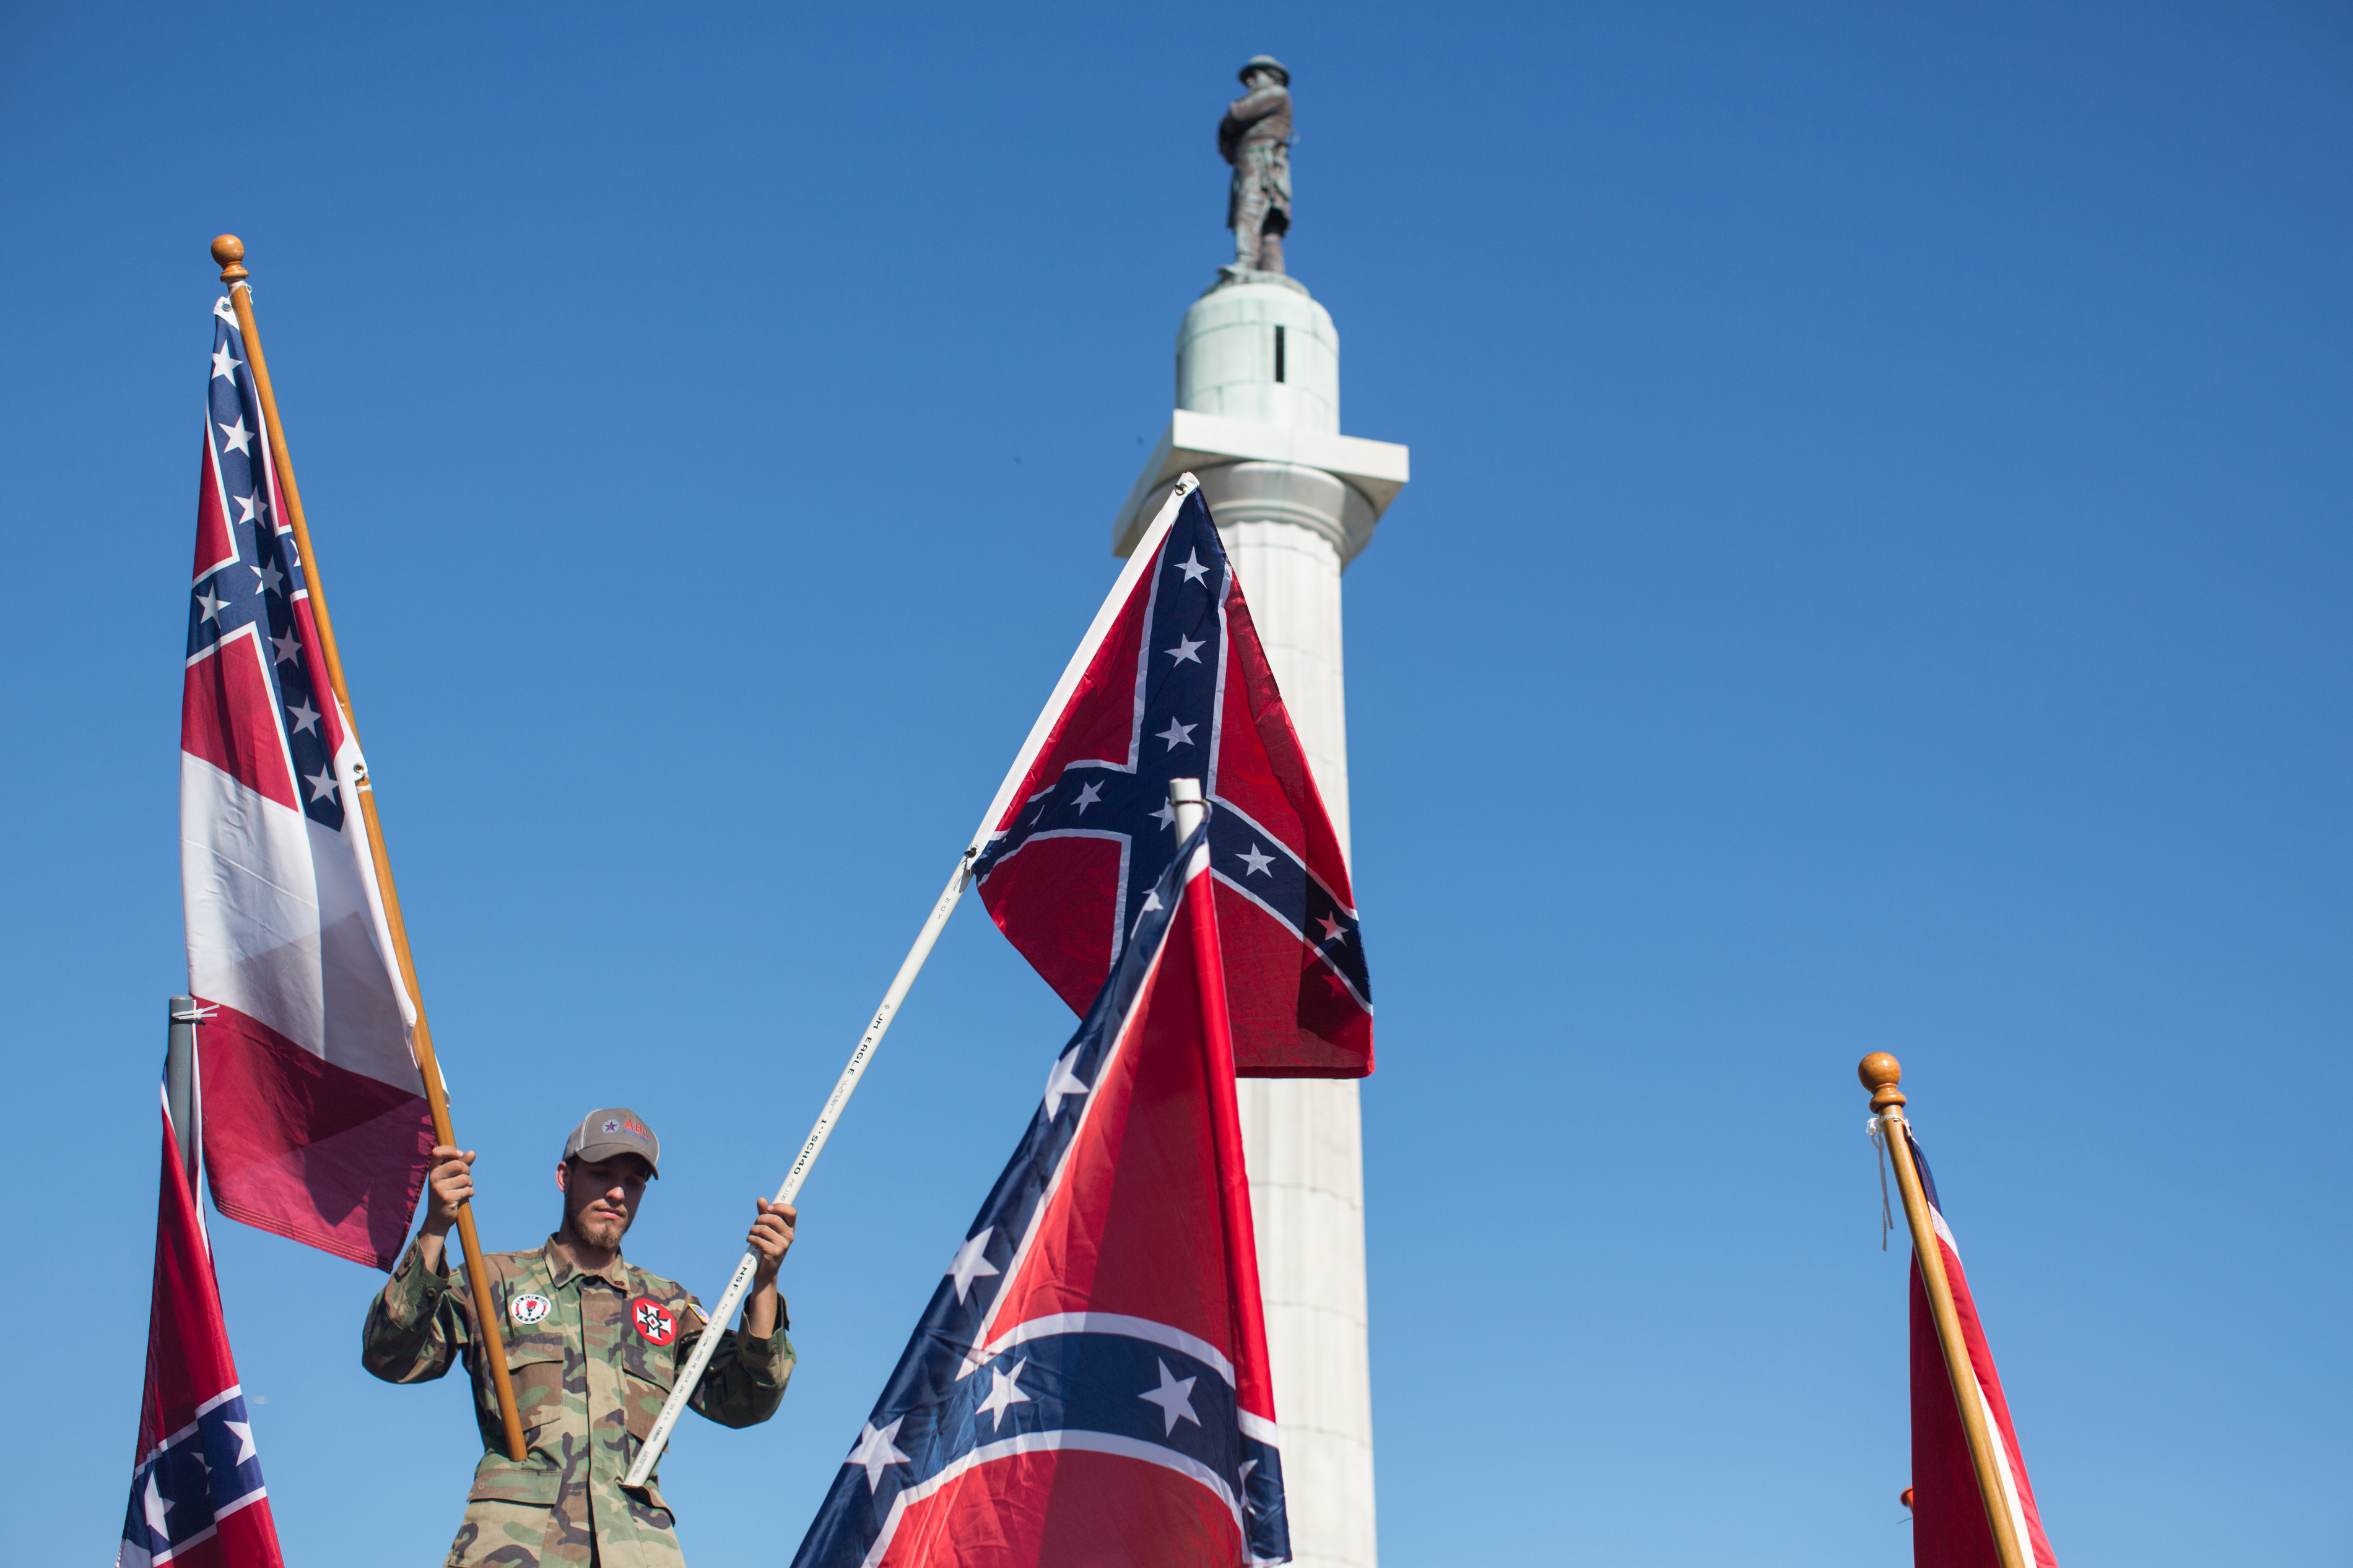 NEW ORLEANS, MAY 7, 2017: A person in opposition to the removal of monuments to the Confederacy holds confederate flags against the Robert E. Lee statue in New Orleans, Louisiana. (Photo by Annie Flanagan for The Washington Post via Getty Images) (The Washington Post/Getty Images)